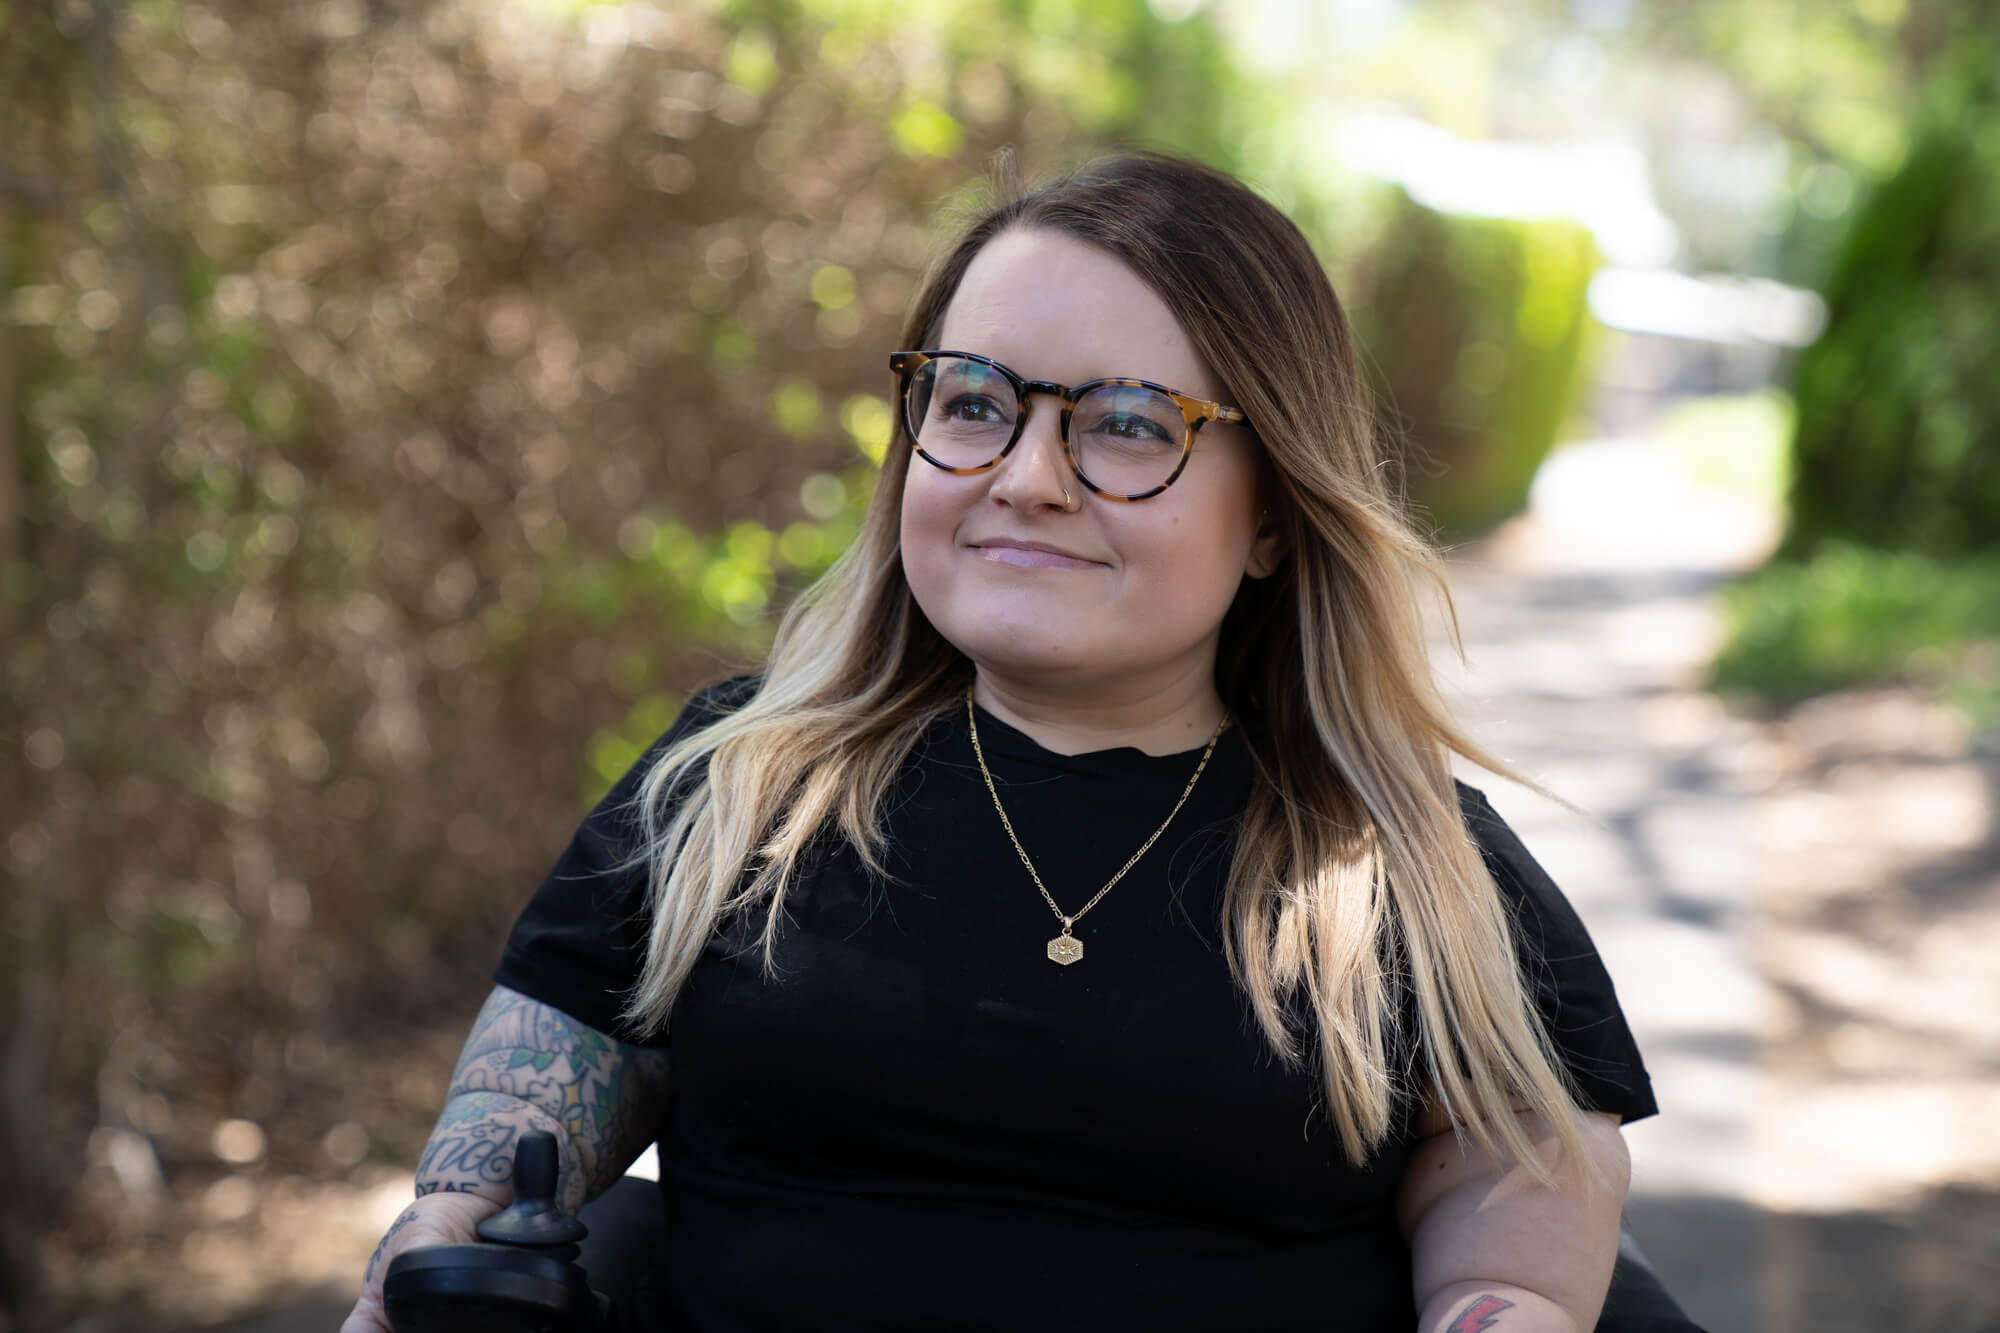 Photo of Belle in her motorised wheelchair outdoors. She wears a short sleeved black shirt which shows her tattooed sleeve. She has tortoiseshell framed glasses and dark brown hair with blonde tips down to her shoulders, and is smiling.